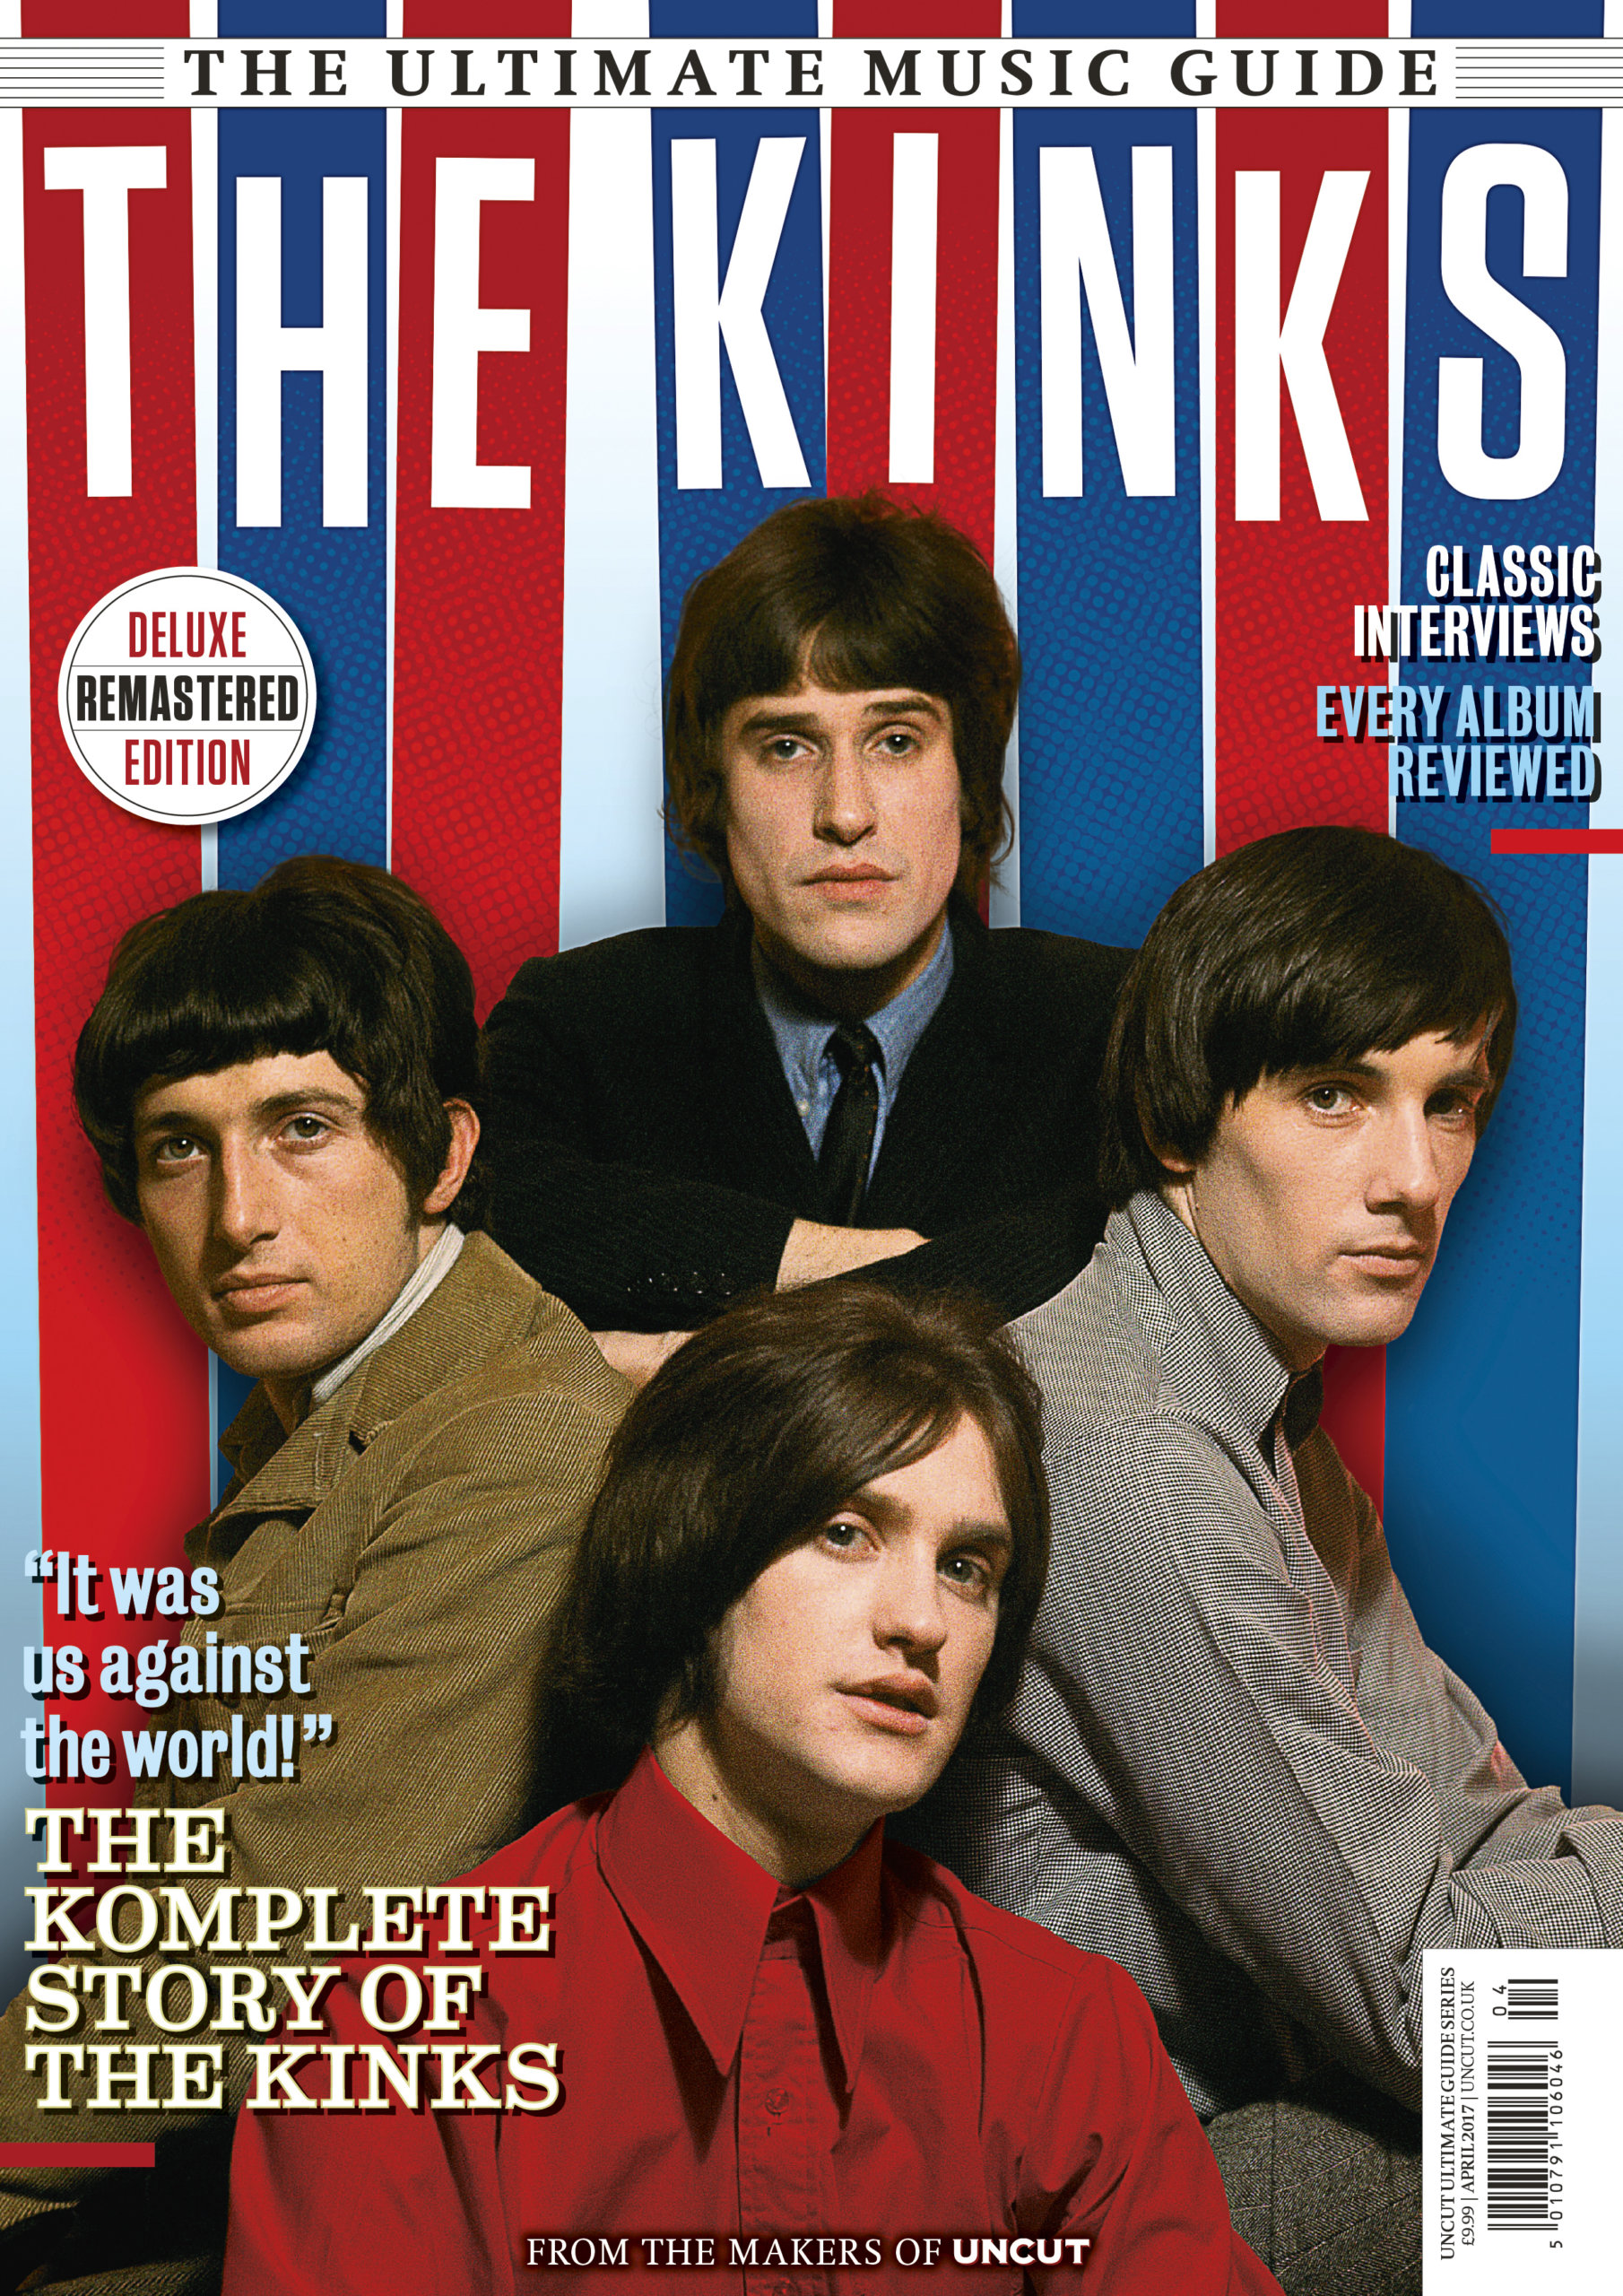 Deluxe Ultimate Music Guide The Kinks Uncut